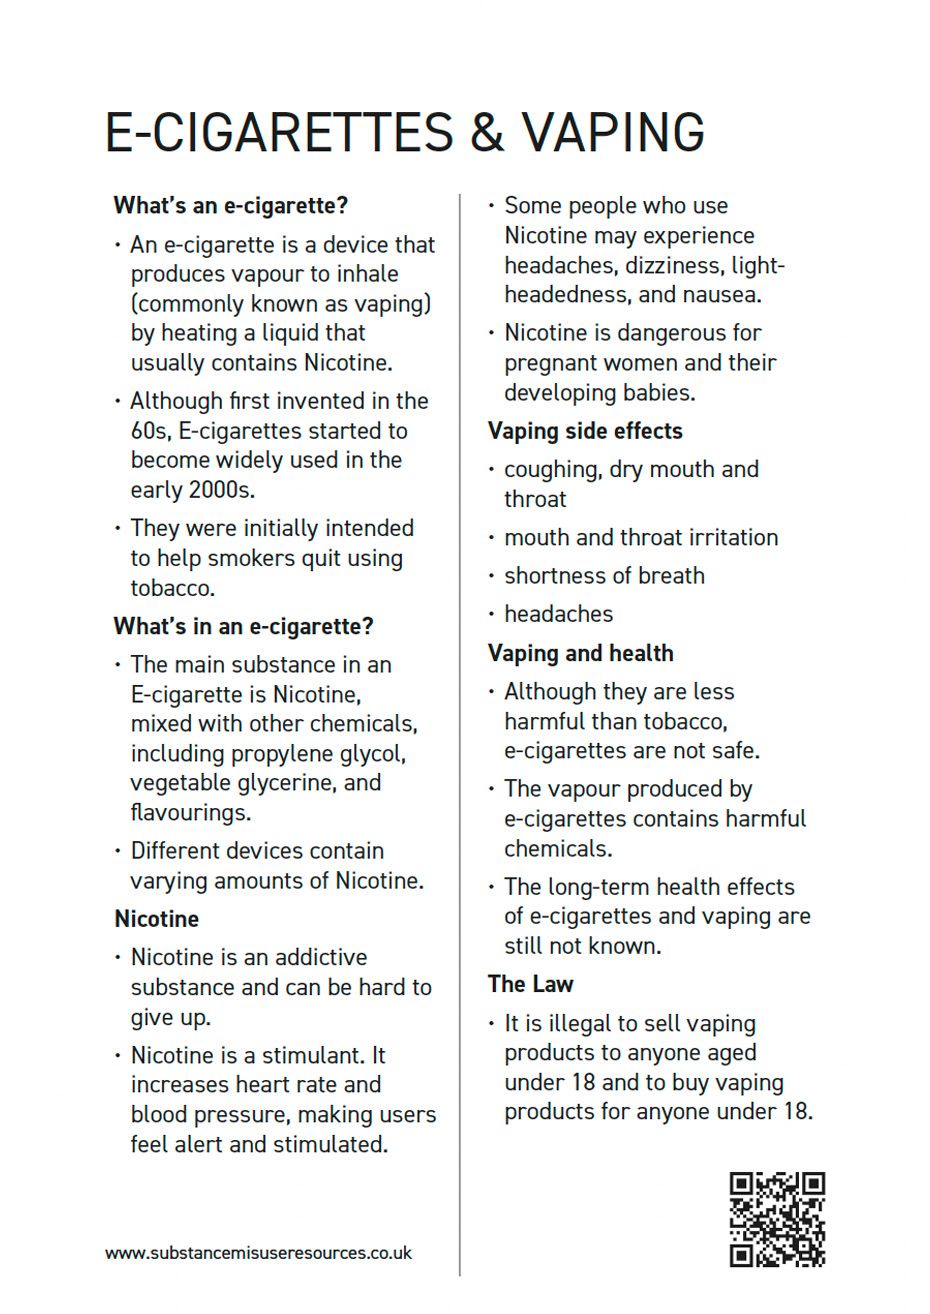 reverse of vaping health information card